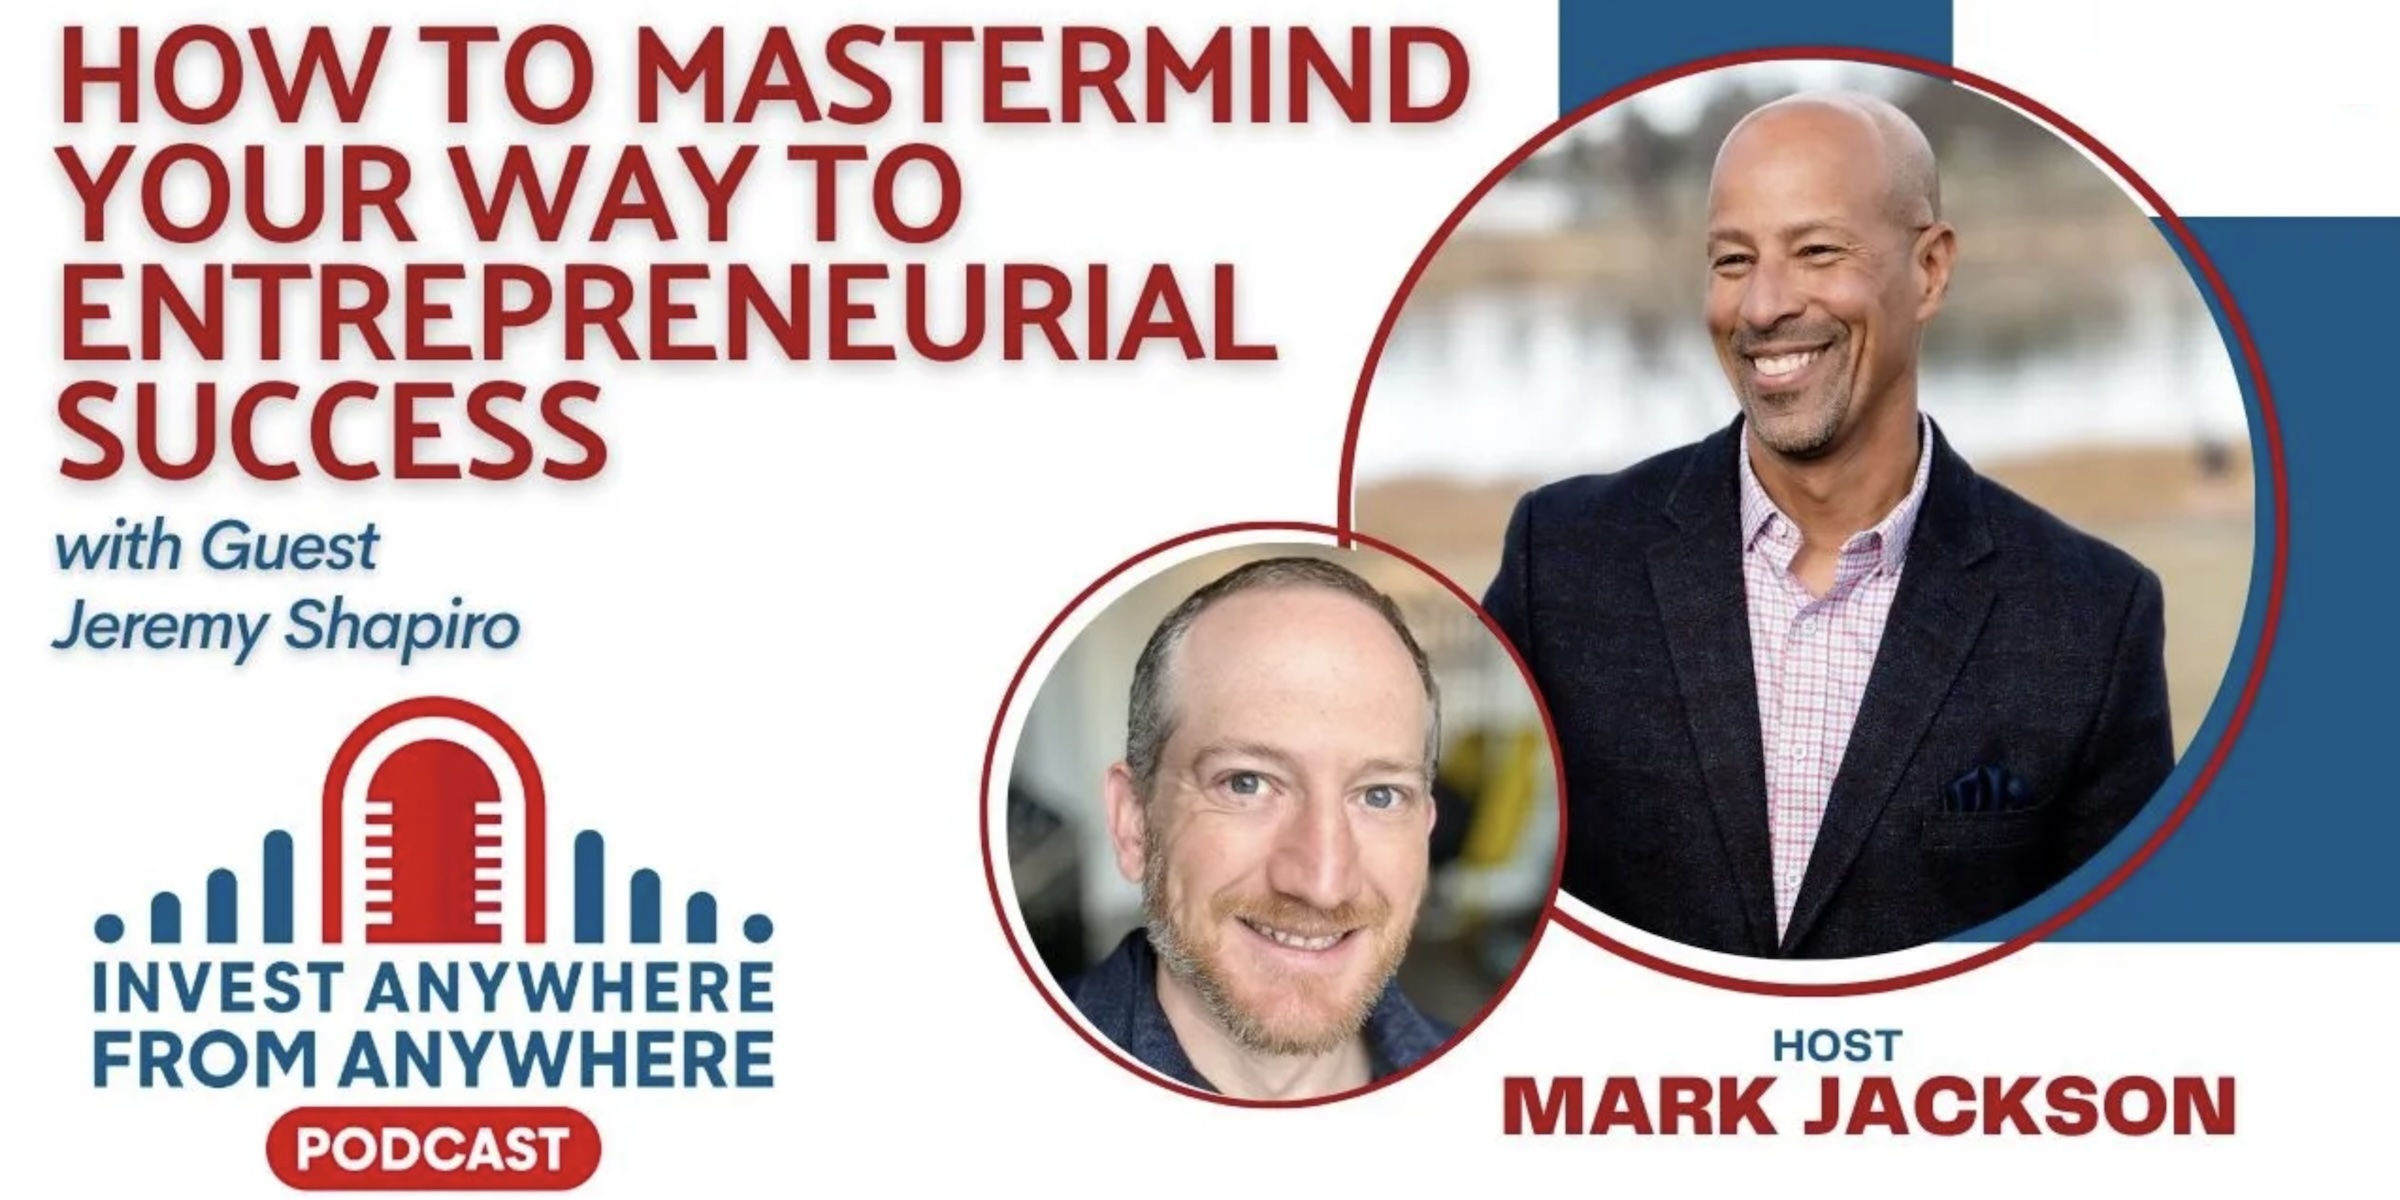 Invest Anywhere: How to Mastermind Your Way to Entrepreneurial Success